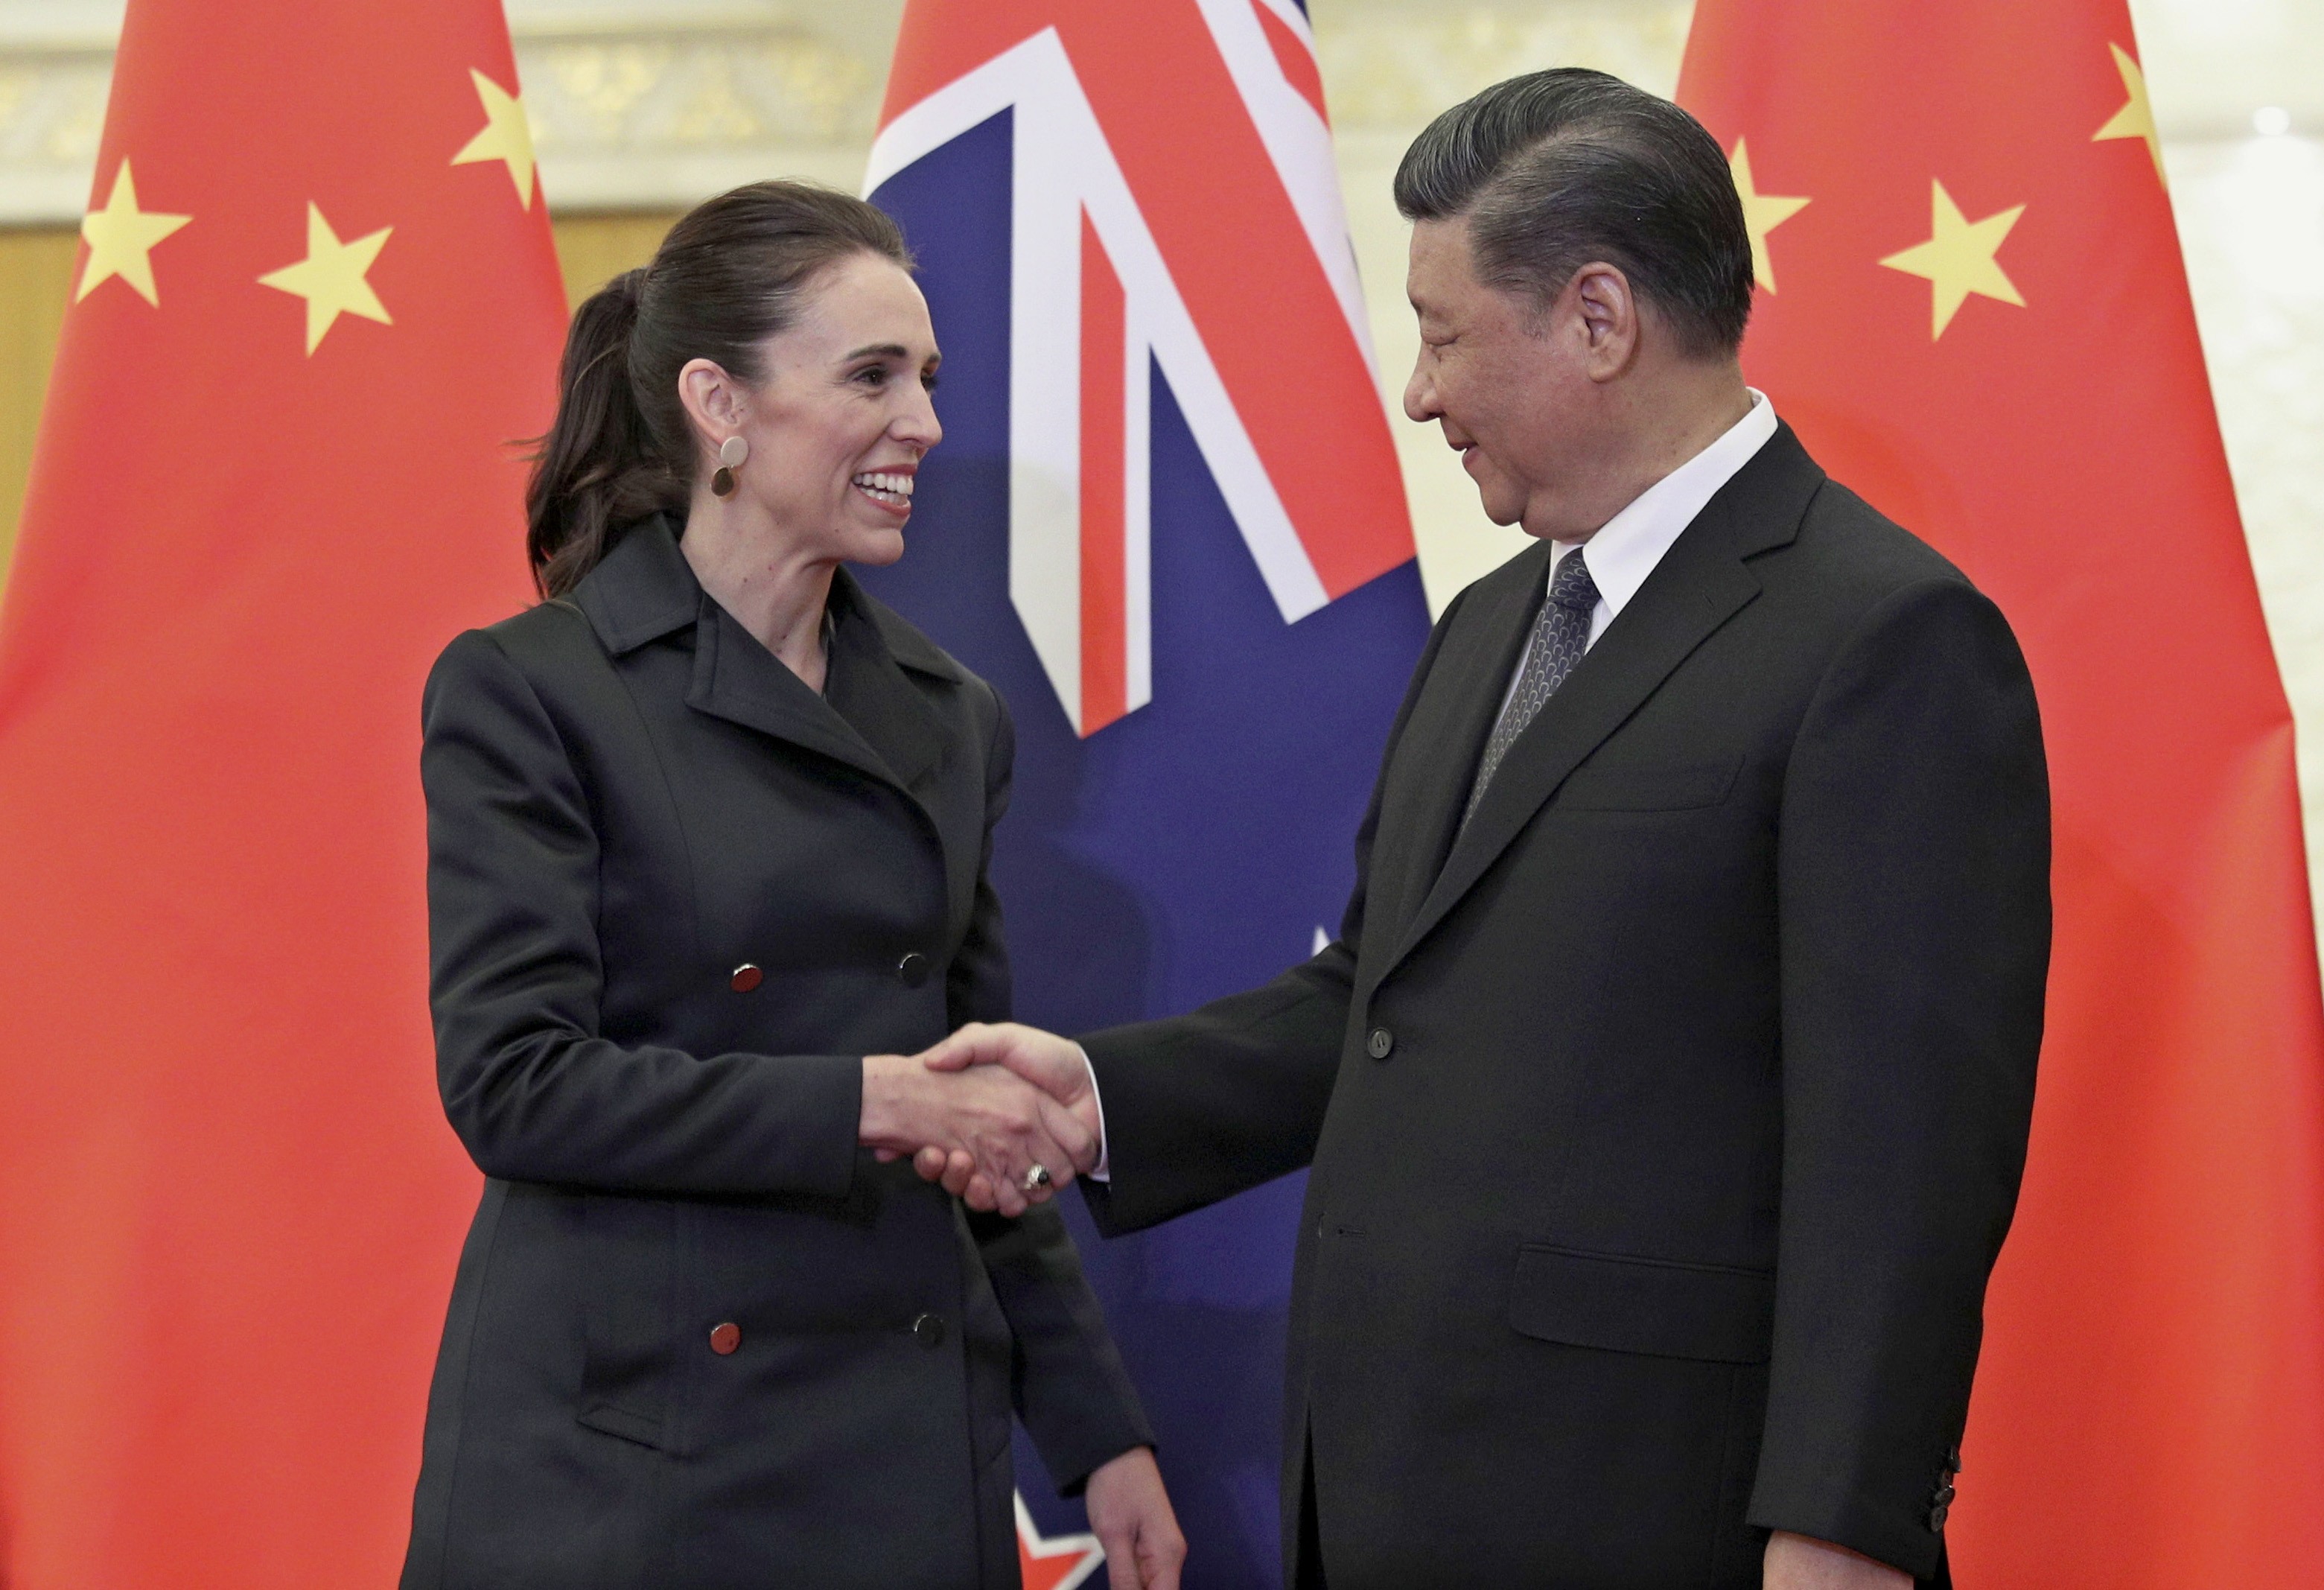 New Zealand leader Jacinda Ardern talks trade and Huawei on whirlwind trip  to China | South China Morning Post